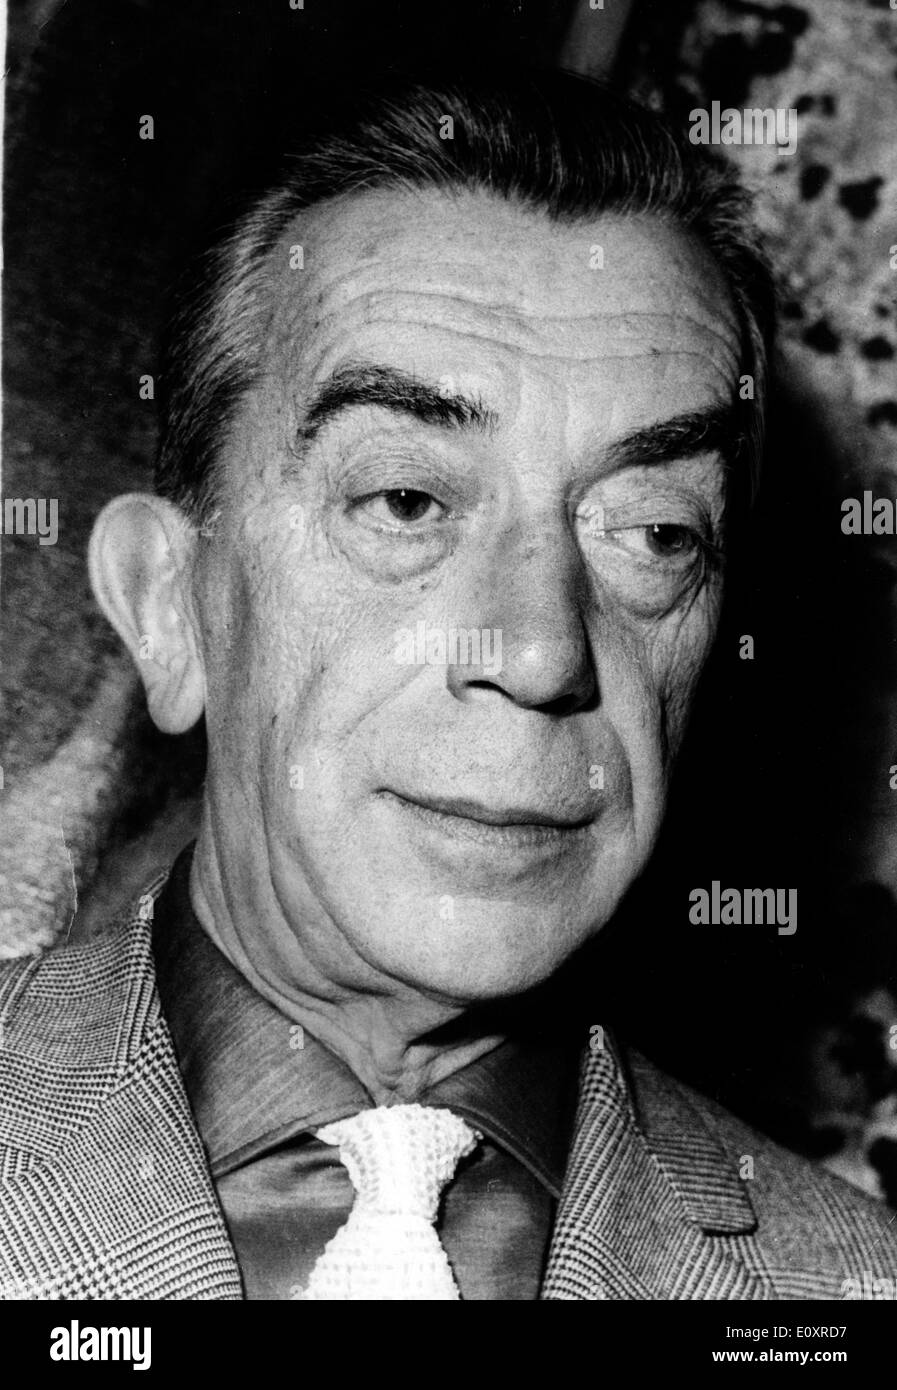 Oct 15, 1967; Paris, France; The famous writer MARCEL AYME, author of 'The Green Mare' and 'Pass Wall' passed away last night at the age of 65, after being sick for several days. The picture shows one of his last portraits. Stock Photo